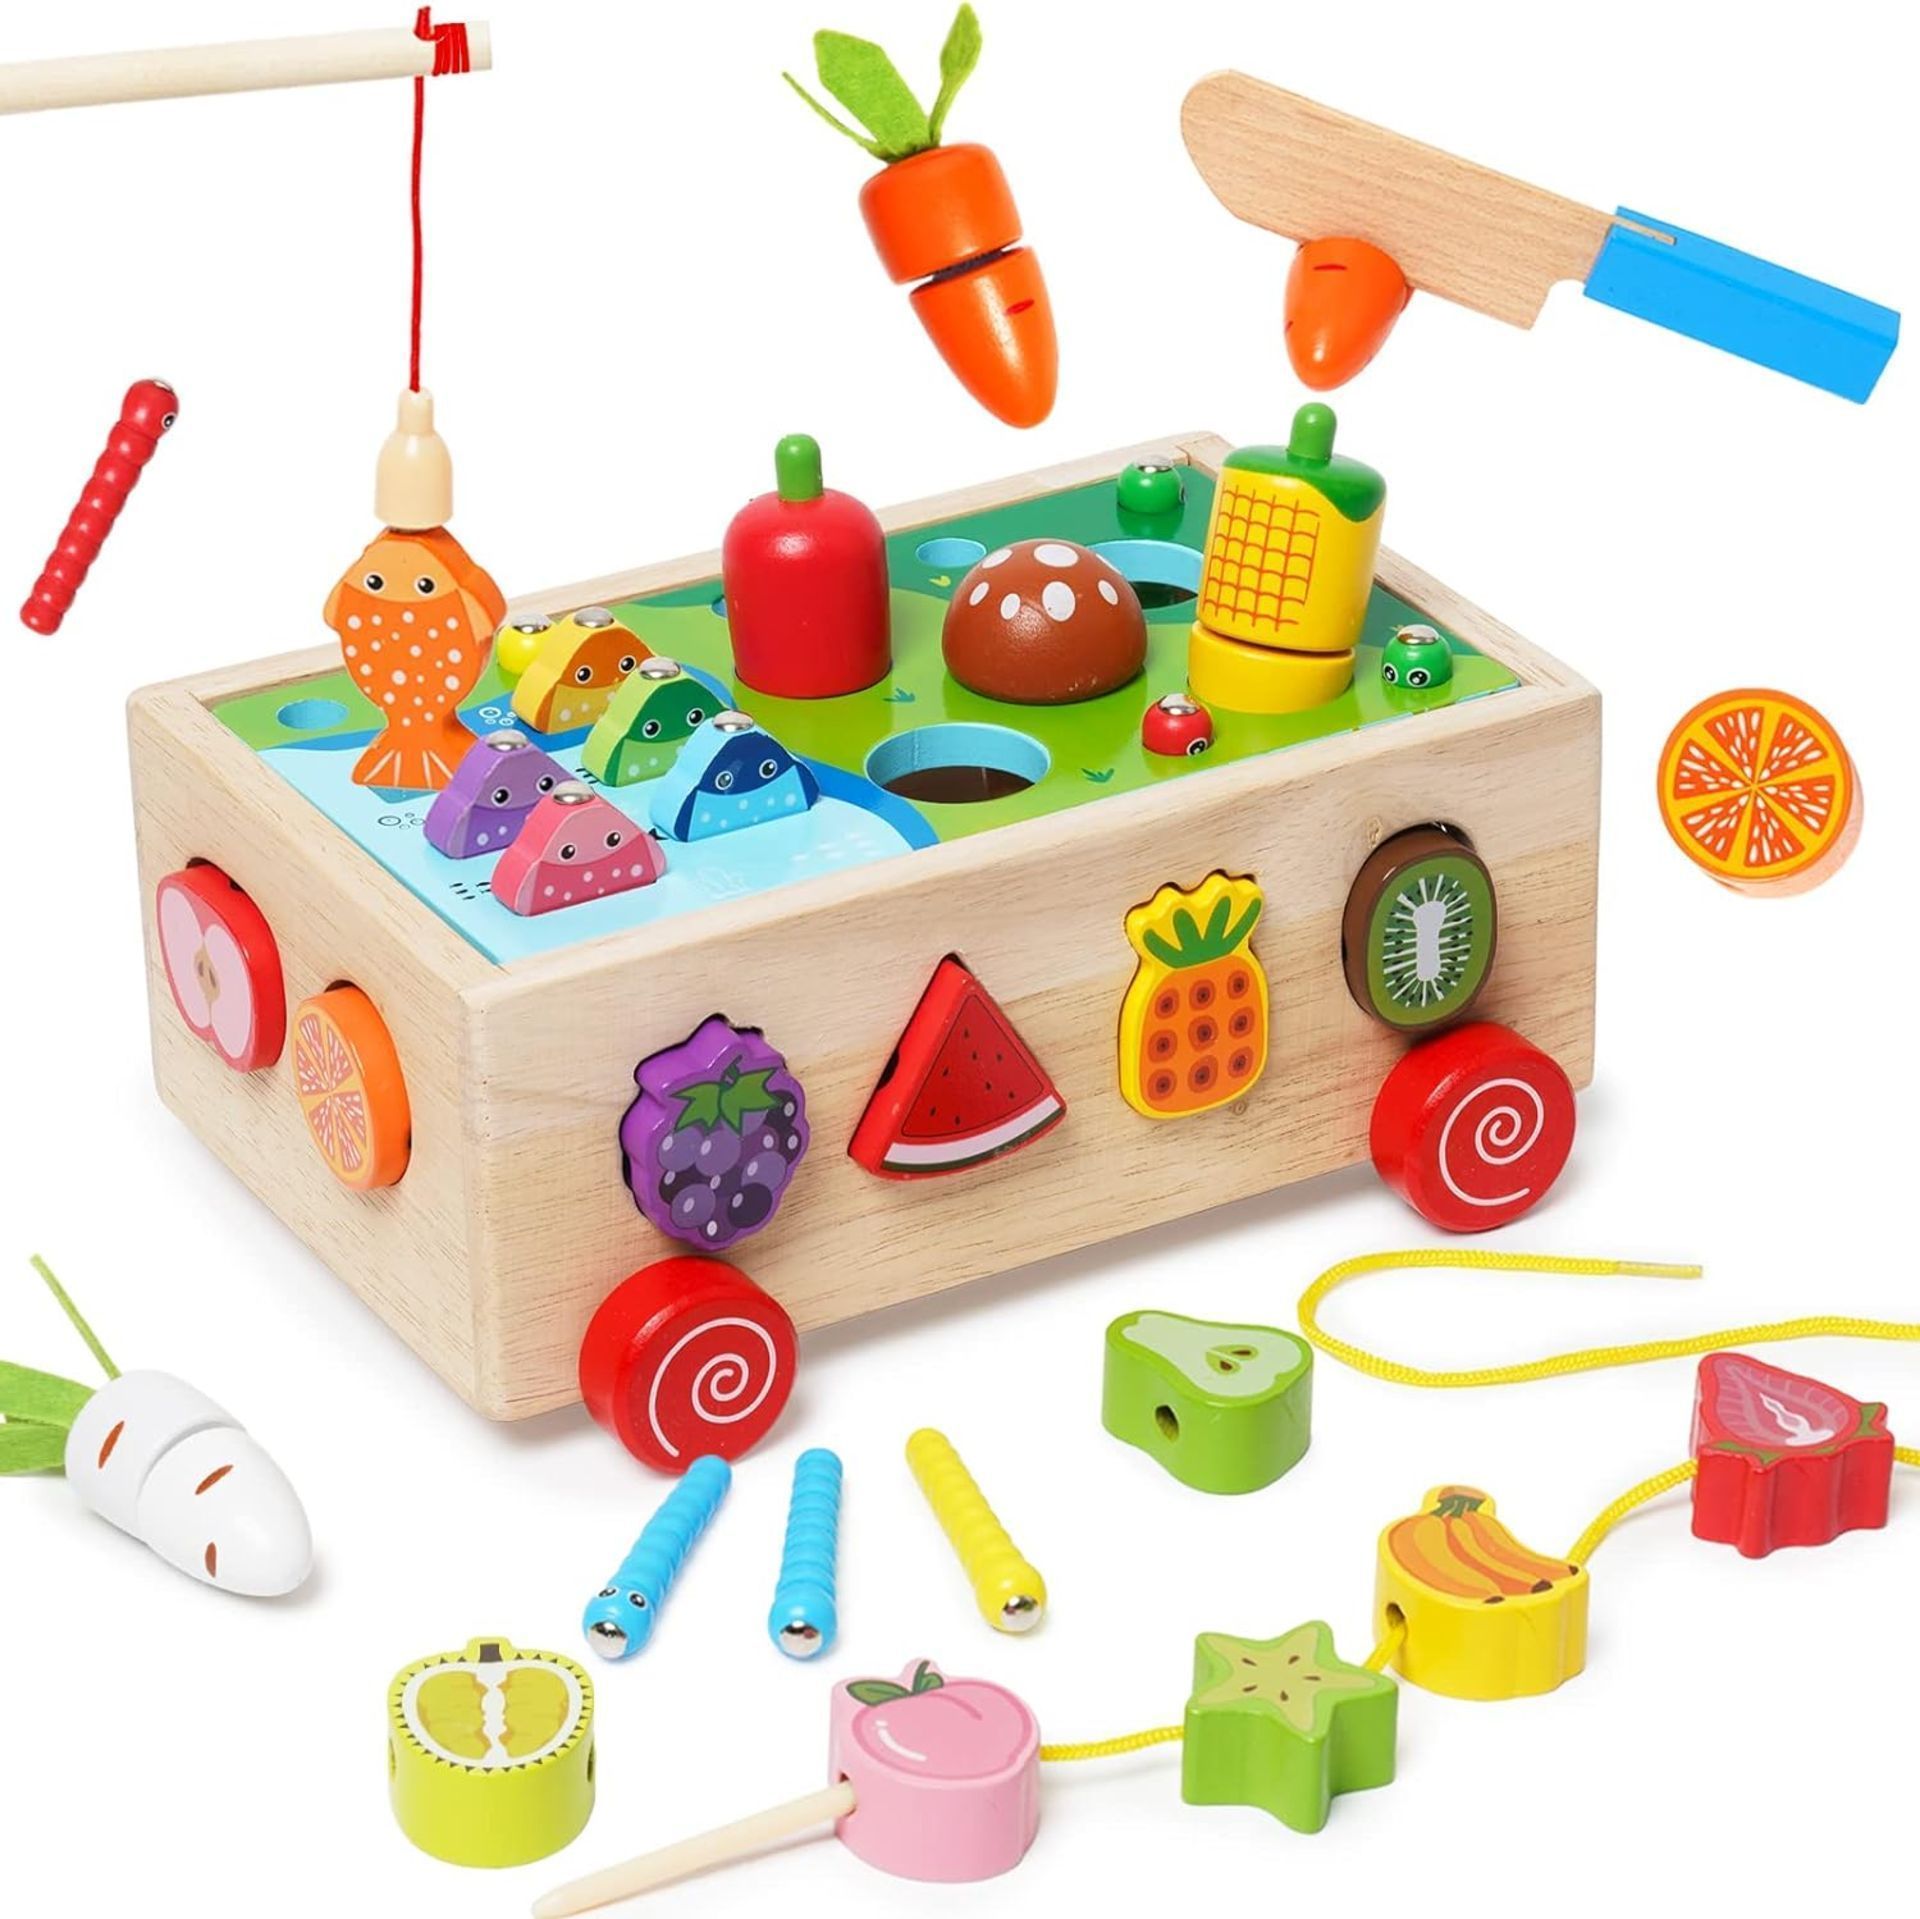 6 X BRAND NEW 7 IN 1 WOODEN TOY WITH CARROT HARVEST, MOTOR SKILLS TO, PLUG IN CUBE SORTING GAME